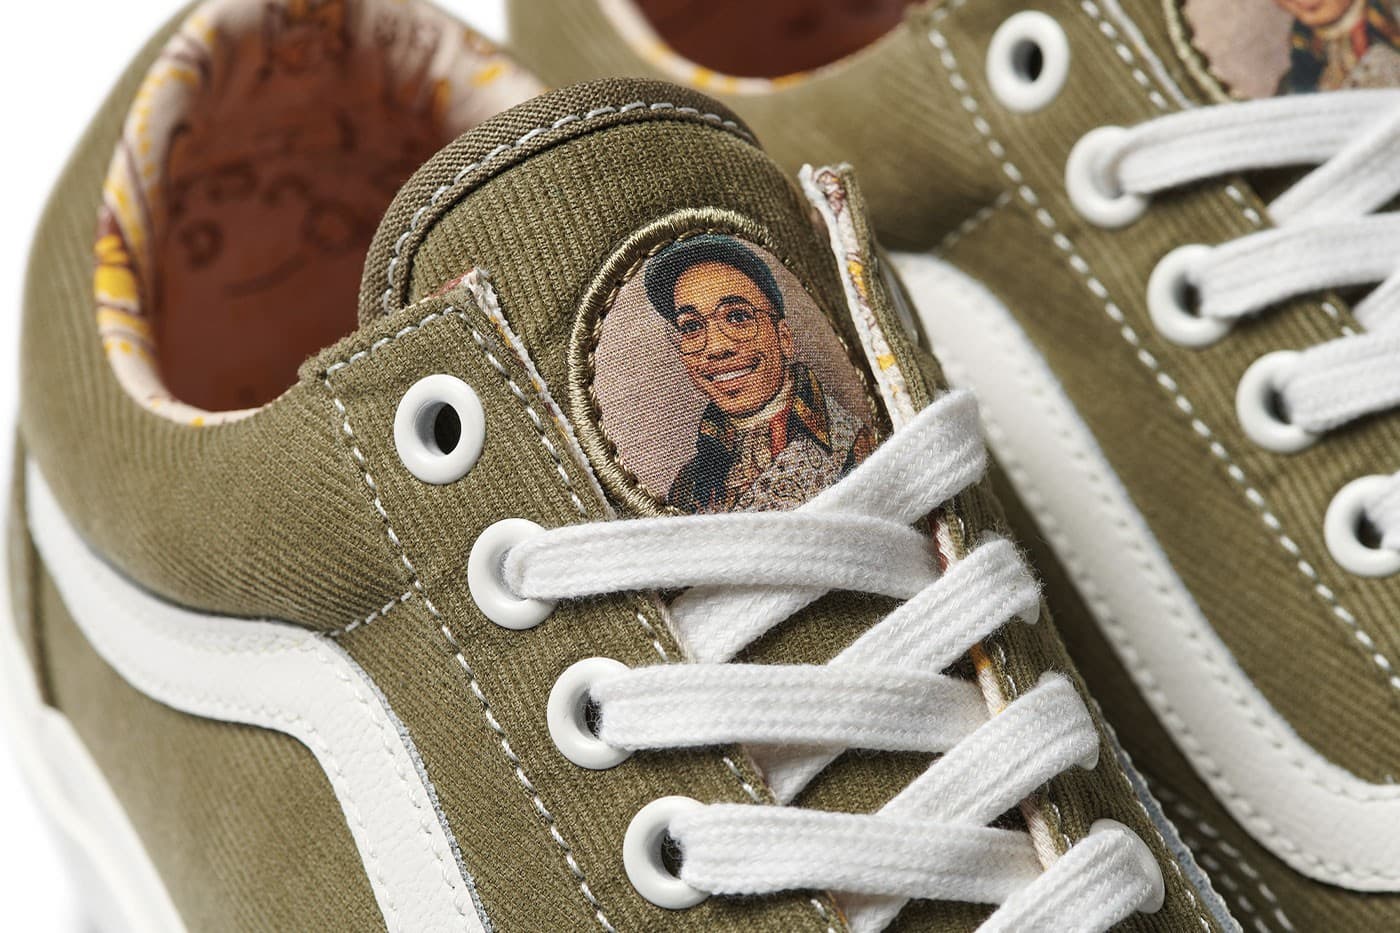 vans-anderson-paak-collab-collection-release-info-005.jpg